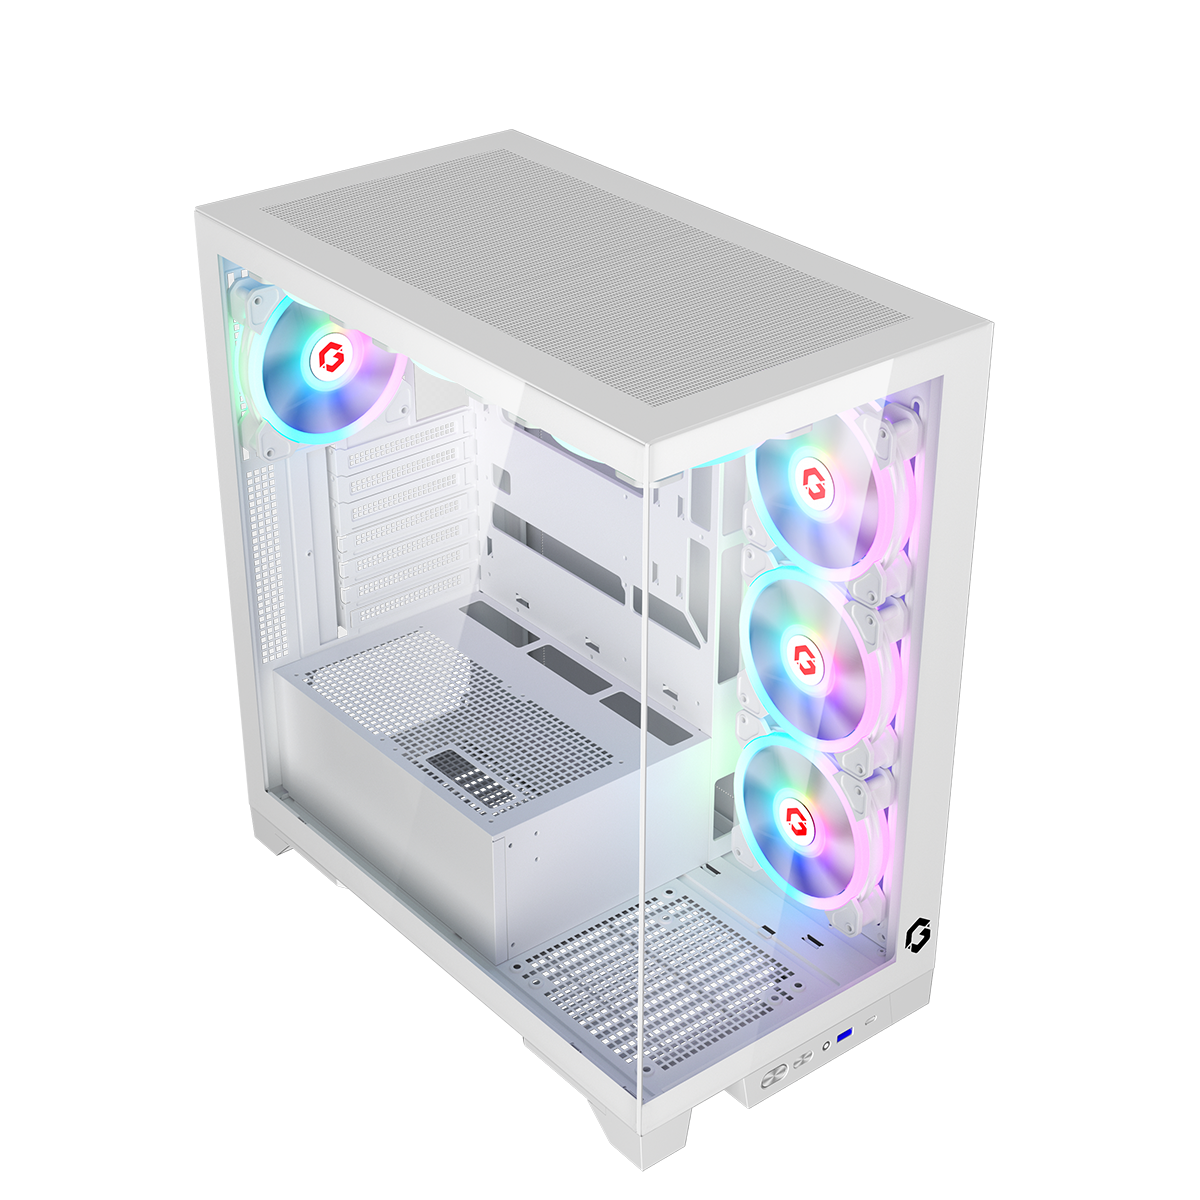 GAMEON Emperor Arctic IV Series Mid Tower Gaming Case - White